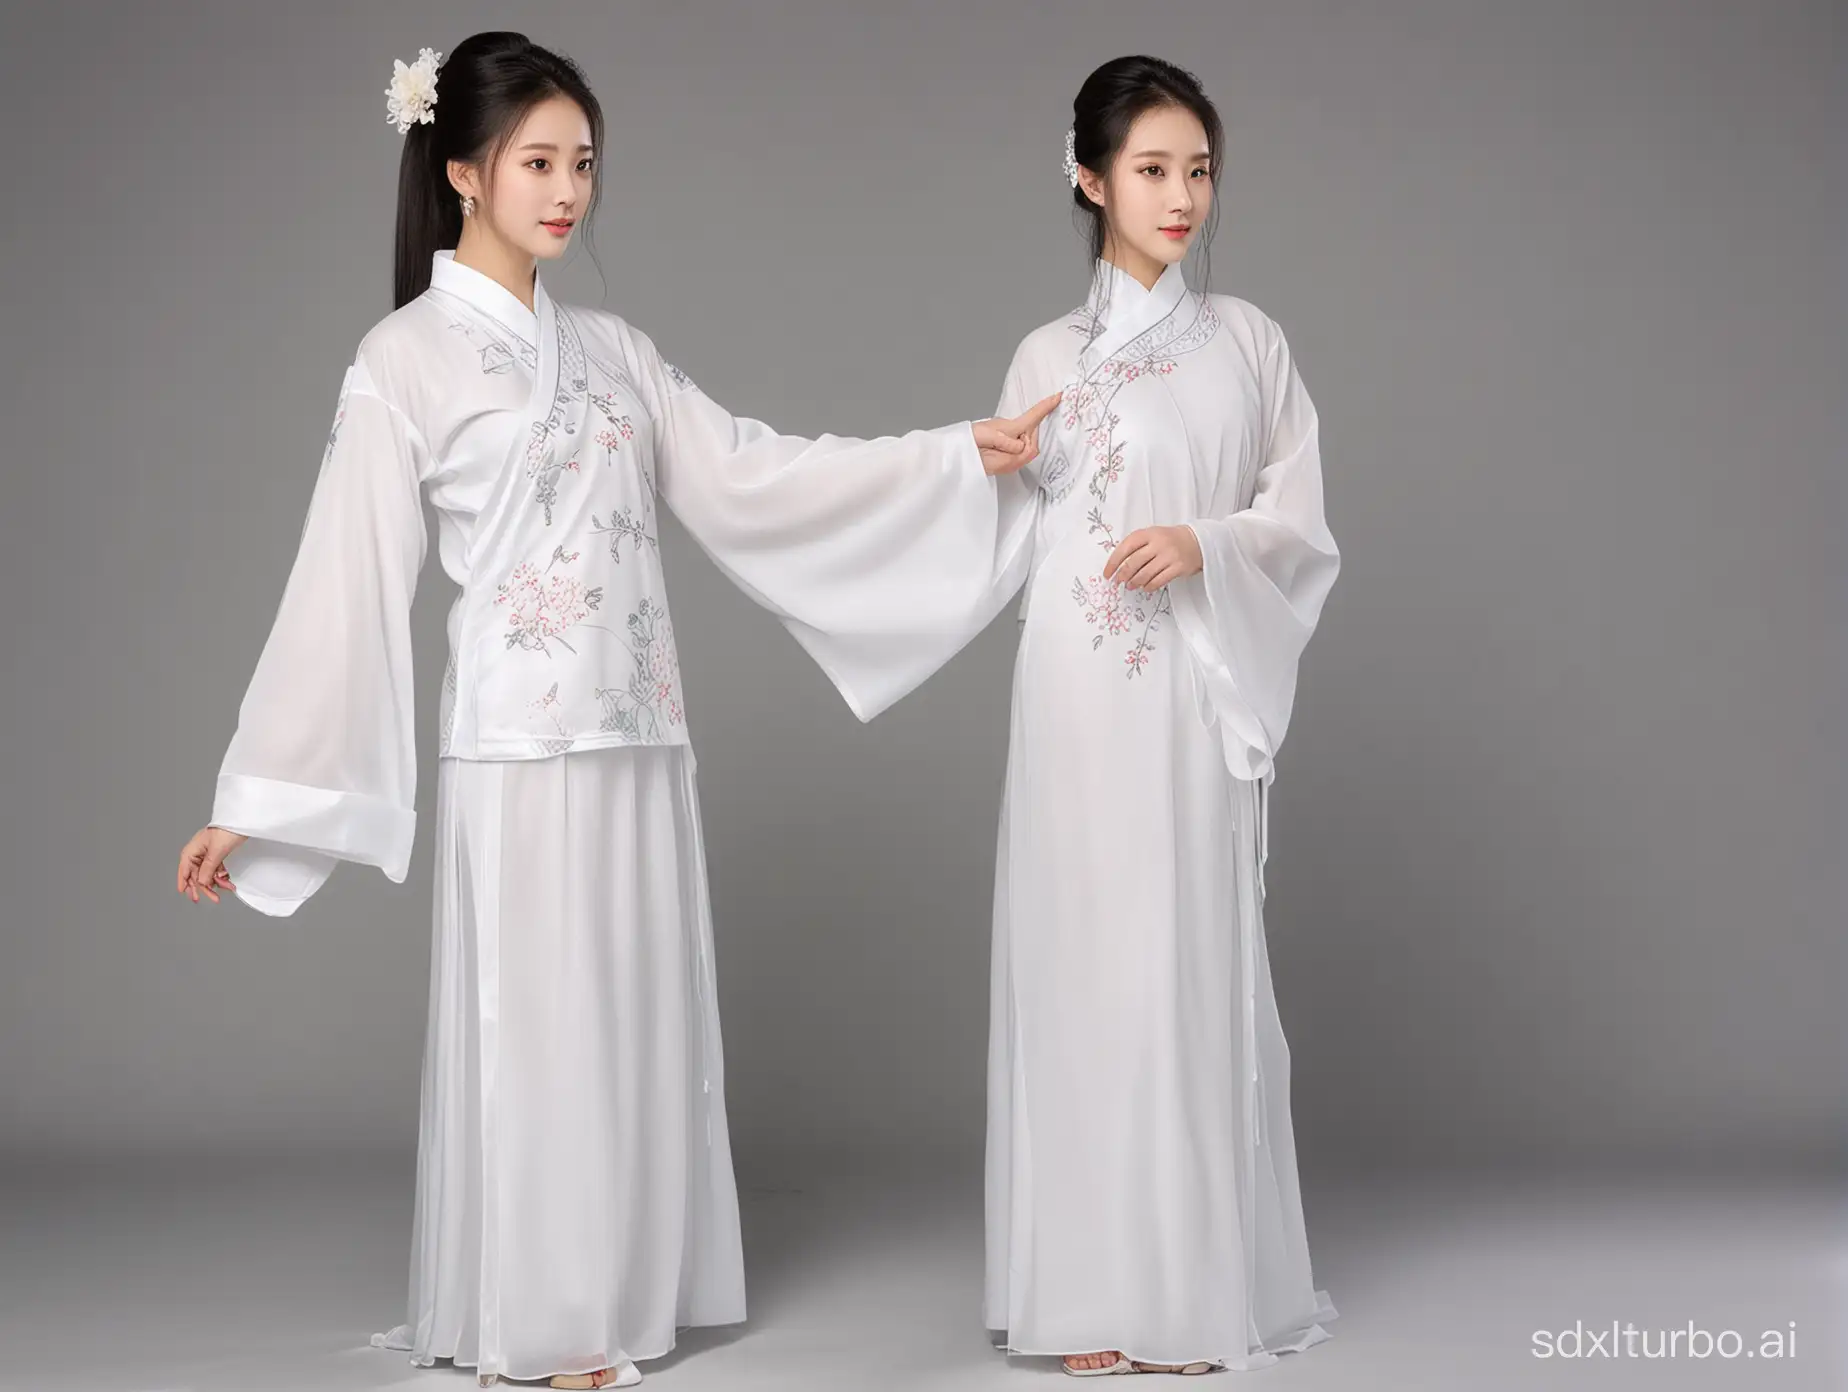 Chinese-Girl-in-Elegant-Traditional-Clothing-Standing-Tall